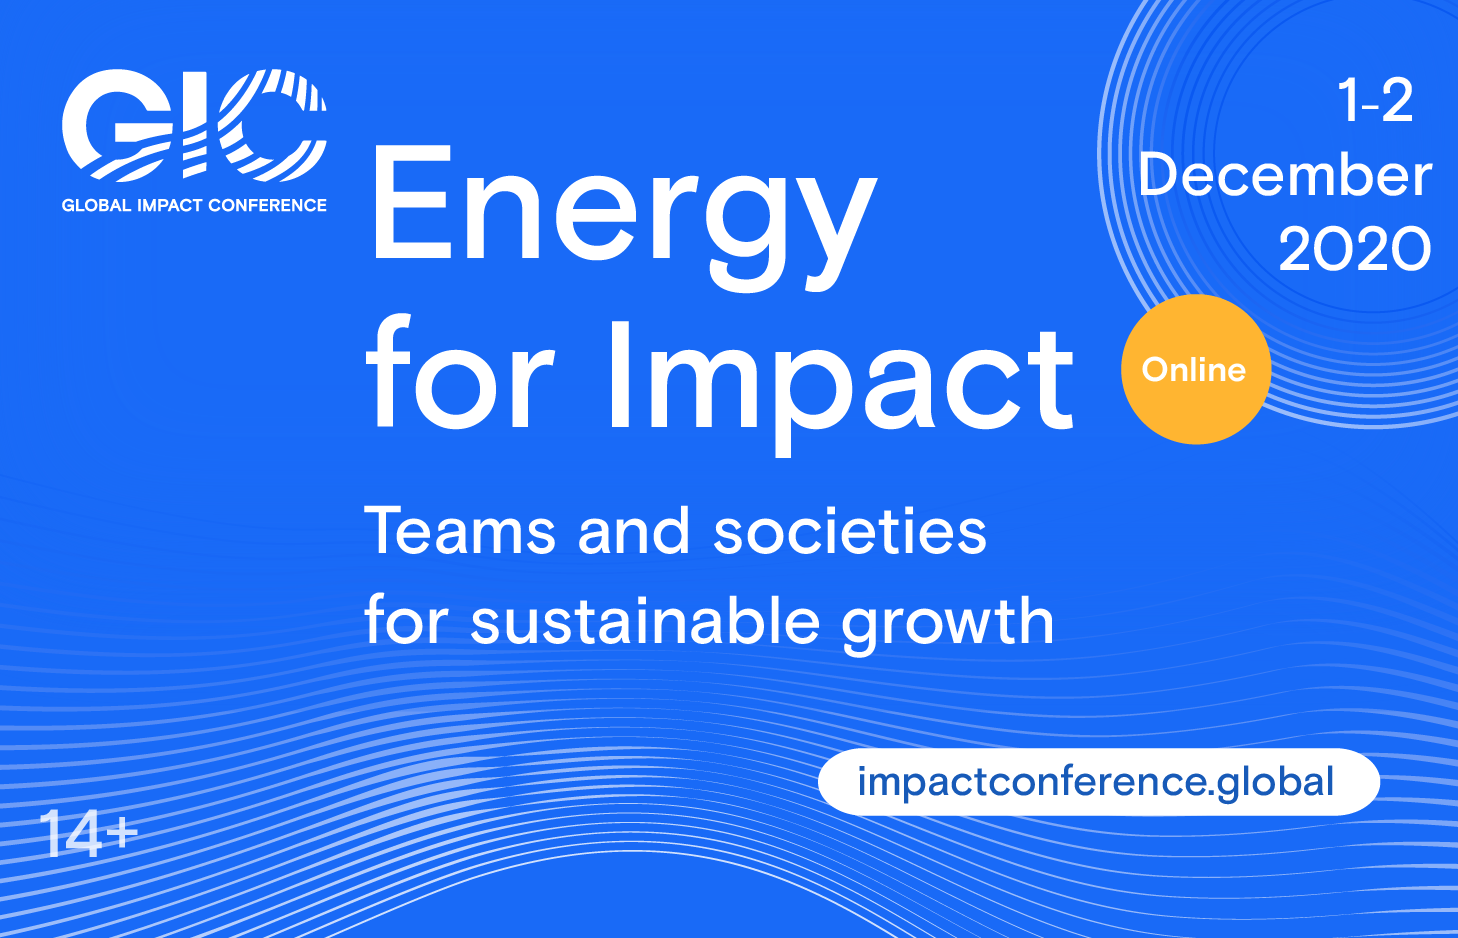 International Leaders to Discuss Human-Centric Sustainability at “Energy for Impact” Conference